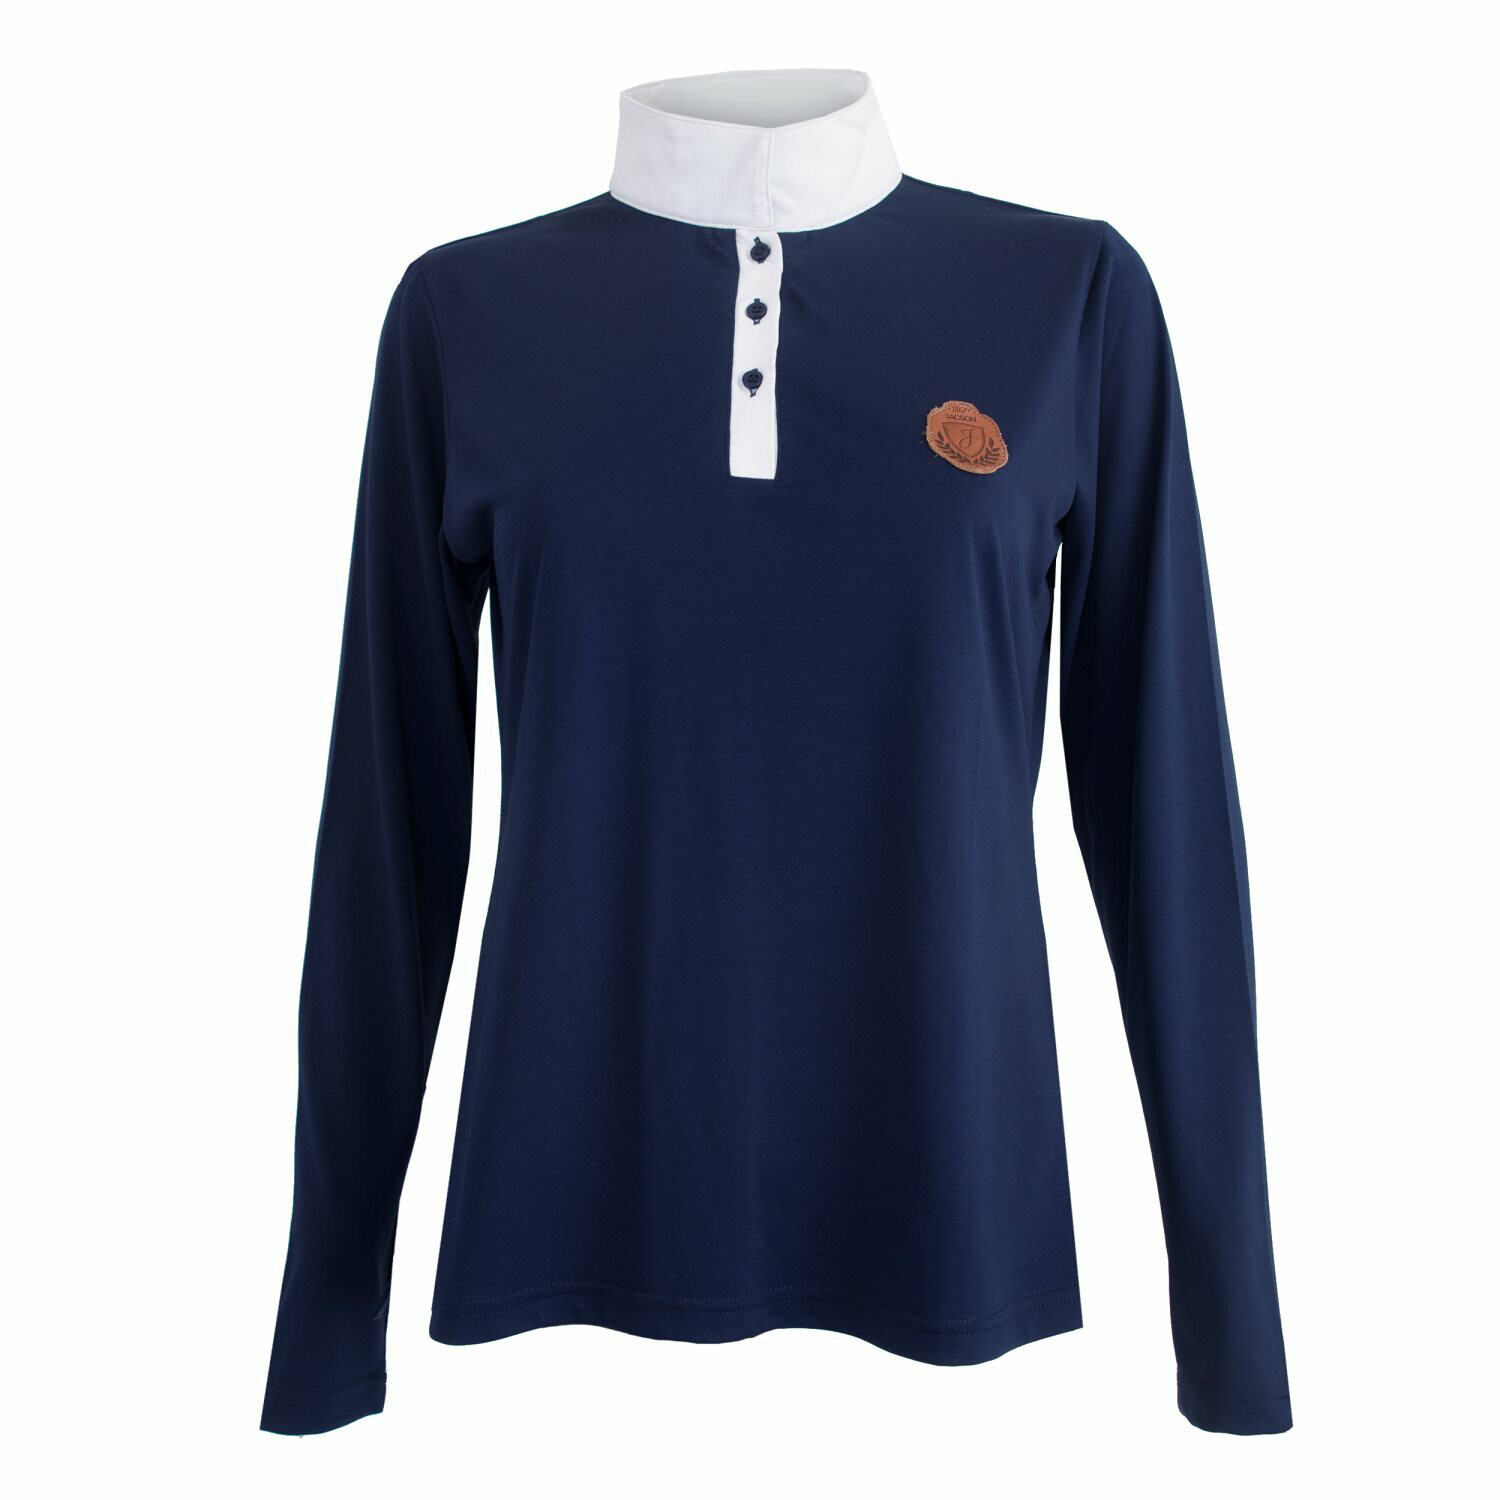 Kids Cathy Long Sleeve Competition Top